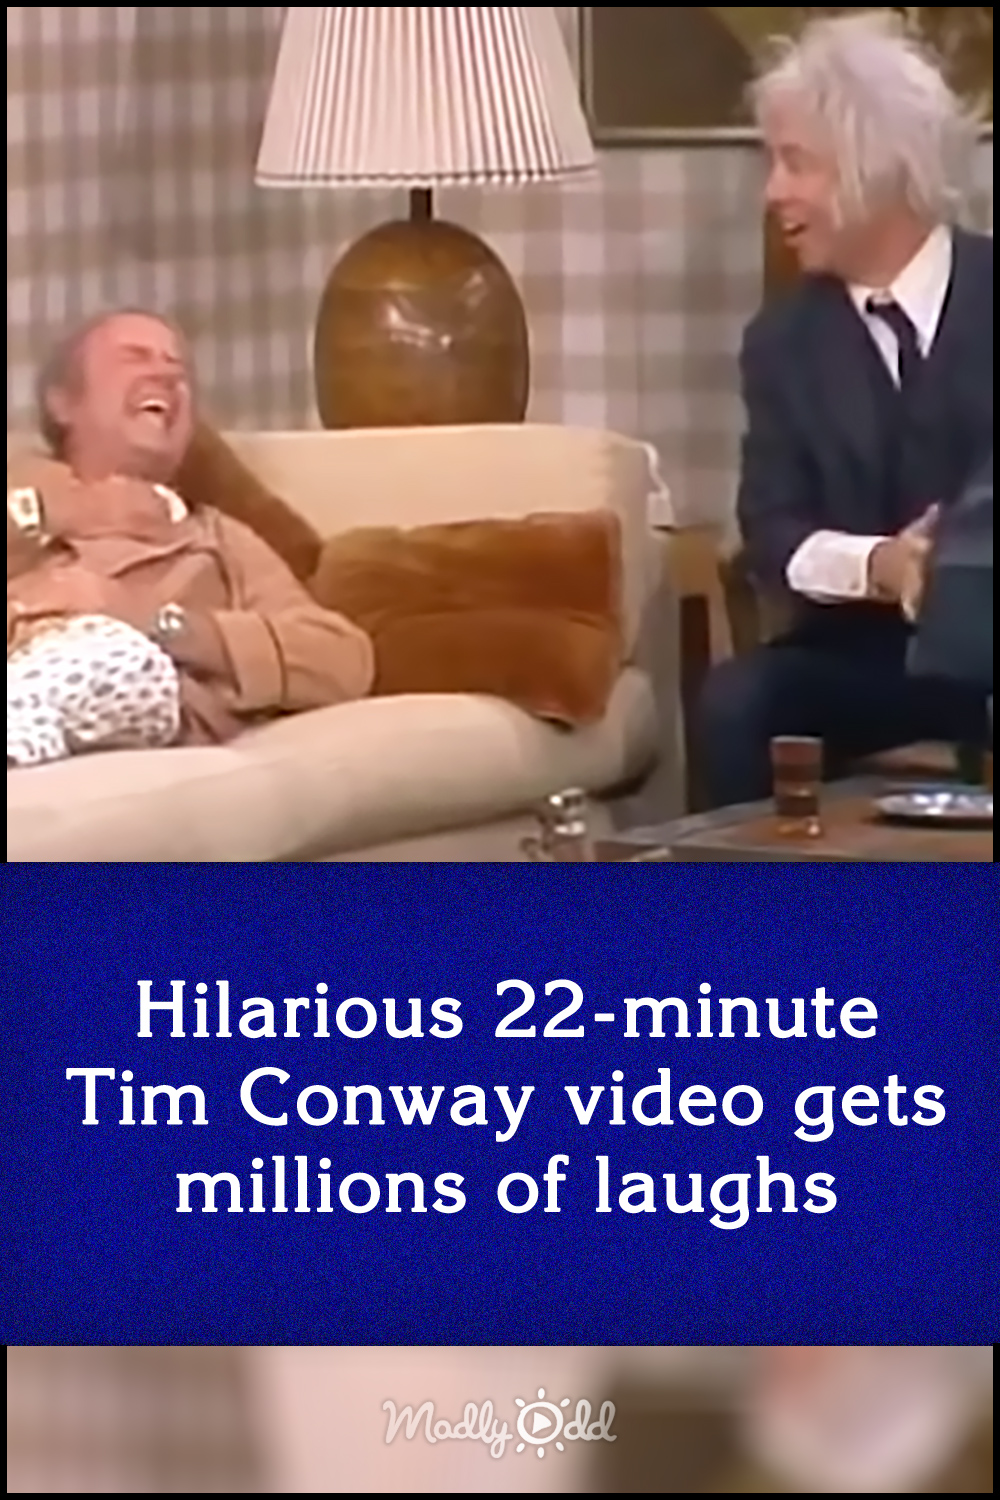 Hilarious 22-minute Tim Conway video gets millions of laughs